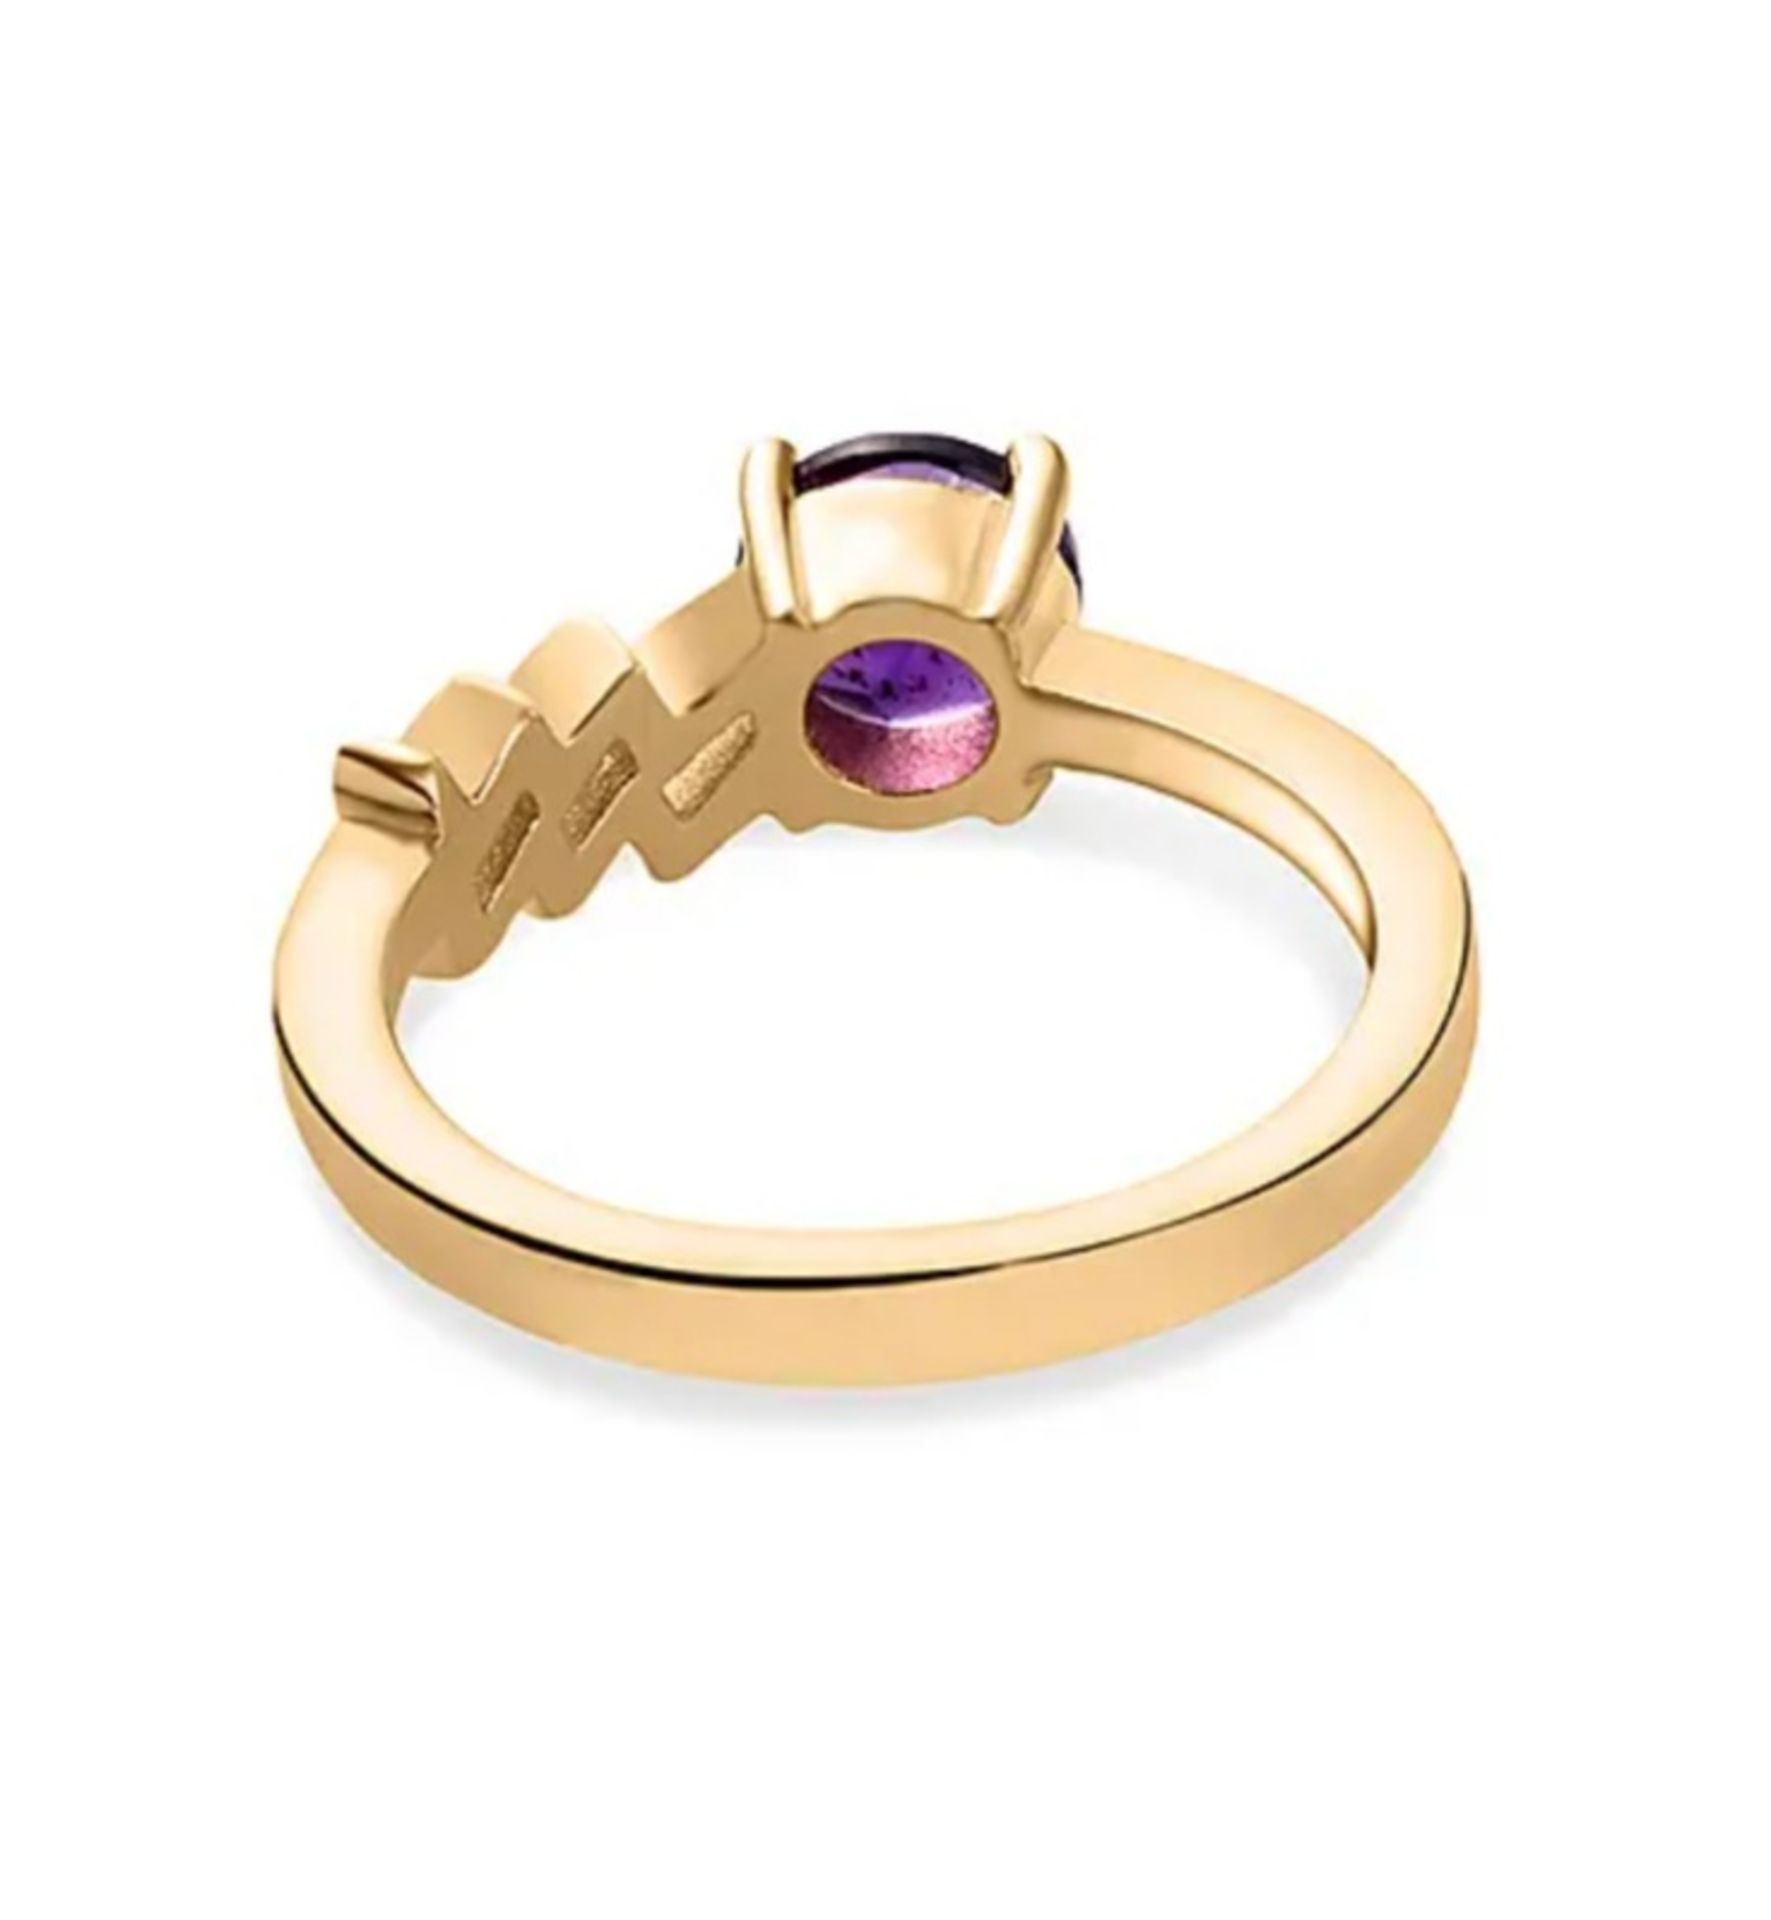 NEW! AA Amethyst Zodiac - Aquarius Ring in 14K Gold Overlay Sterling Silver - Image 5 of 5